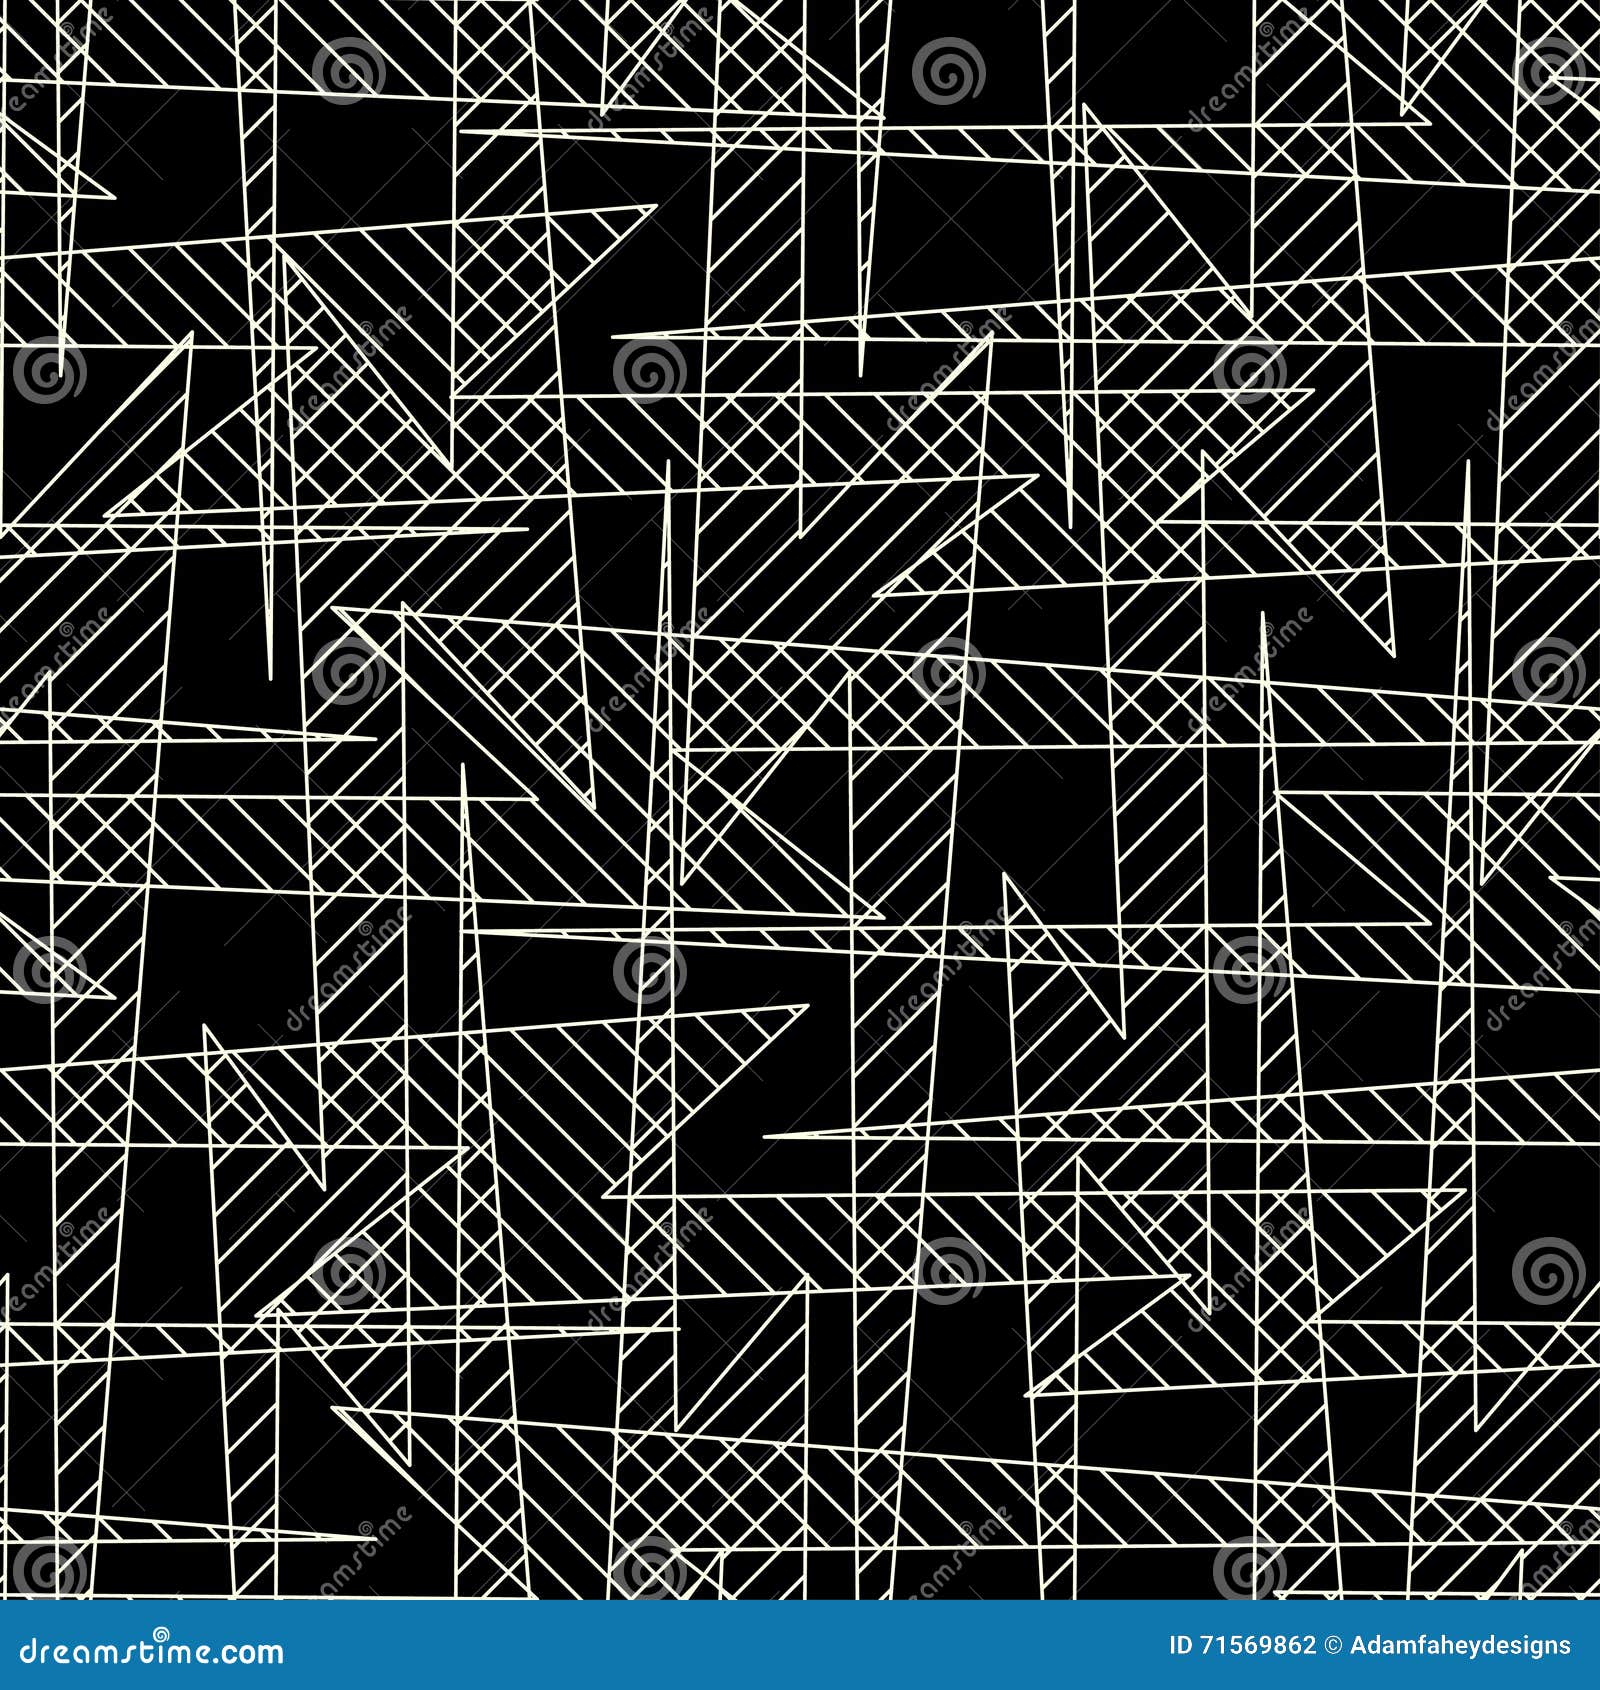 crossed angled lines in a seamless pattern